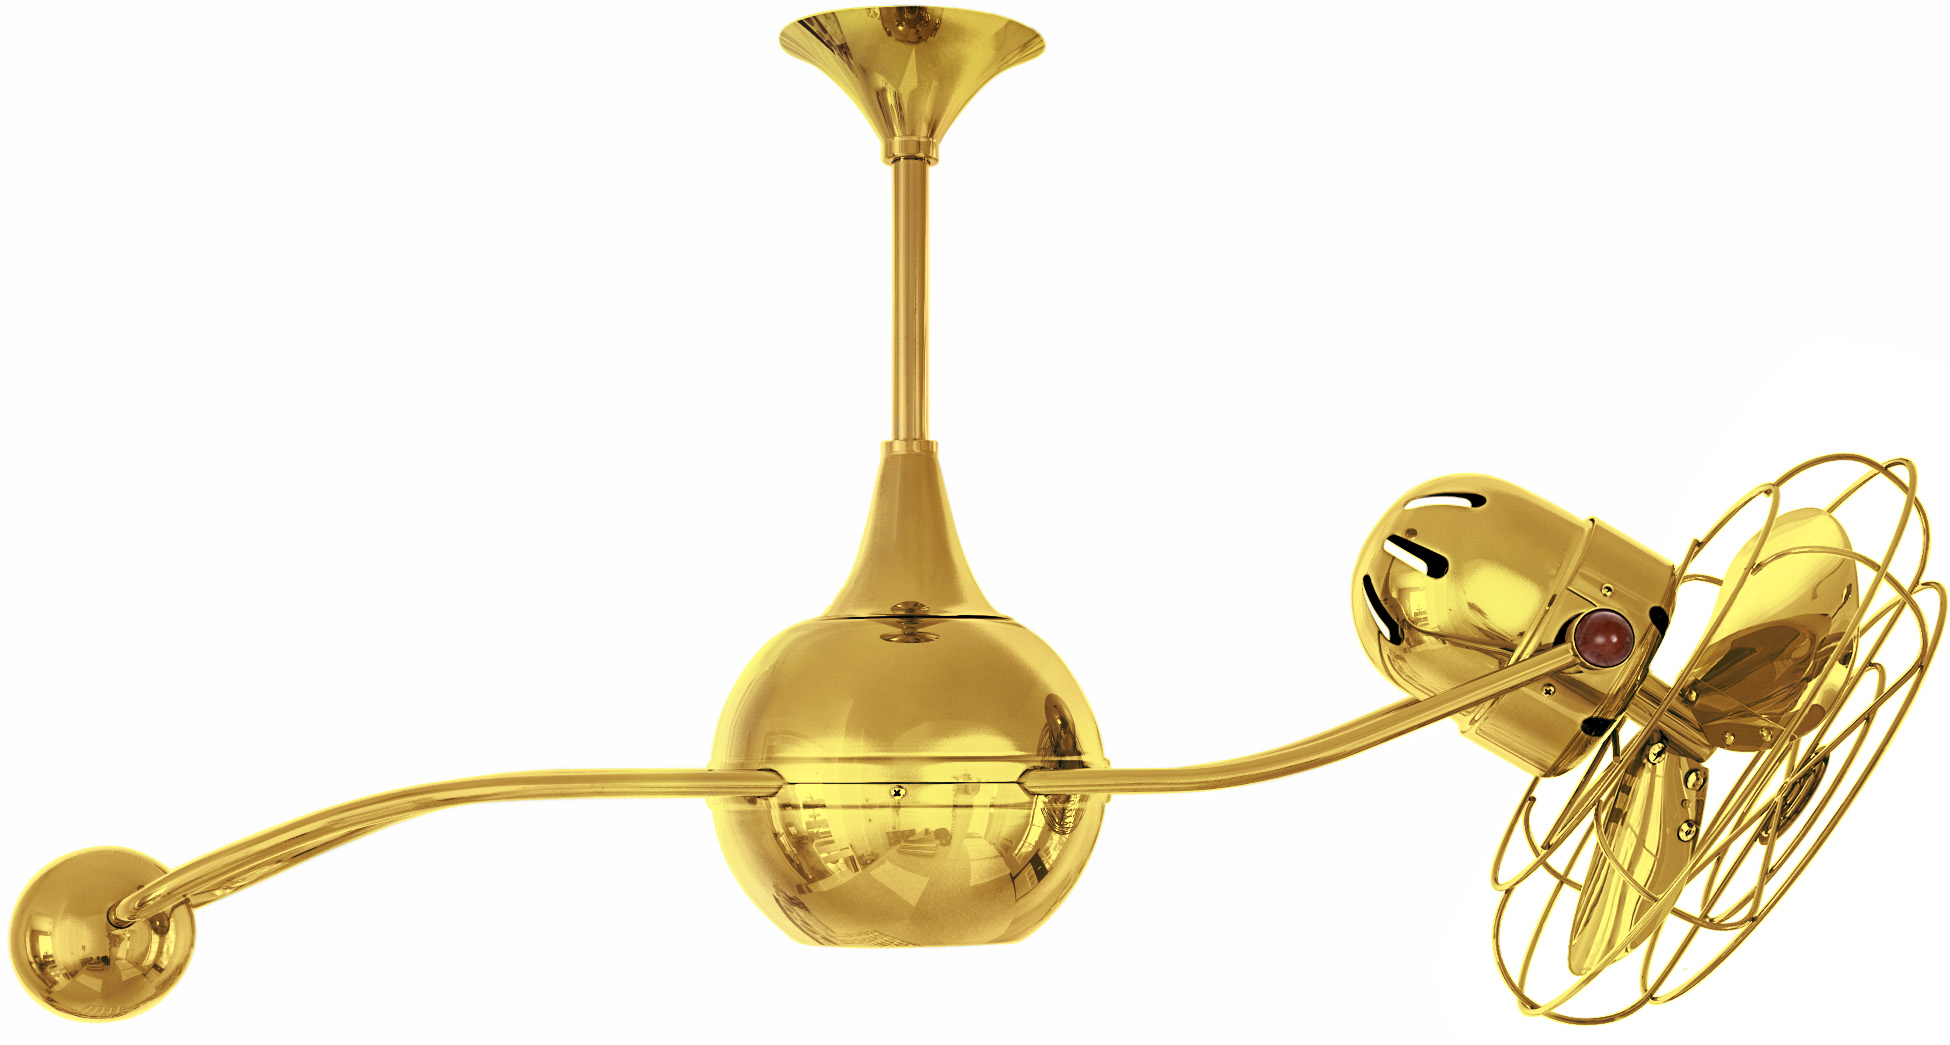 Brisa 2000 ceiling fan in gold / ouro finish with metal blades in decorative cage made by Matthews Fan Company.